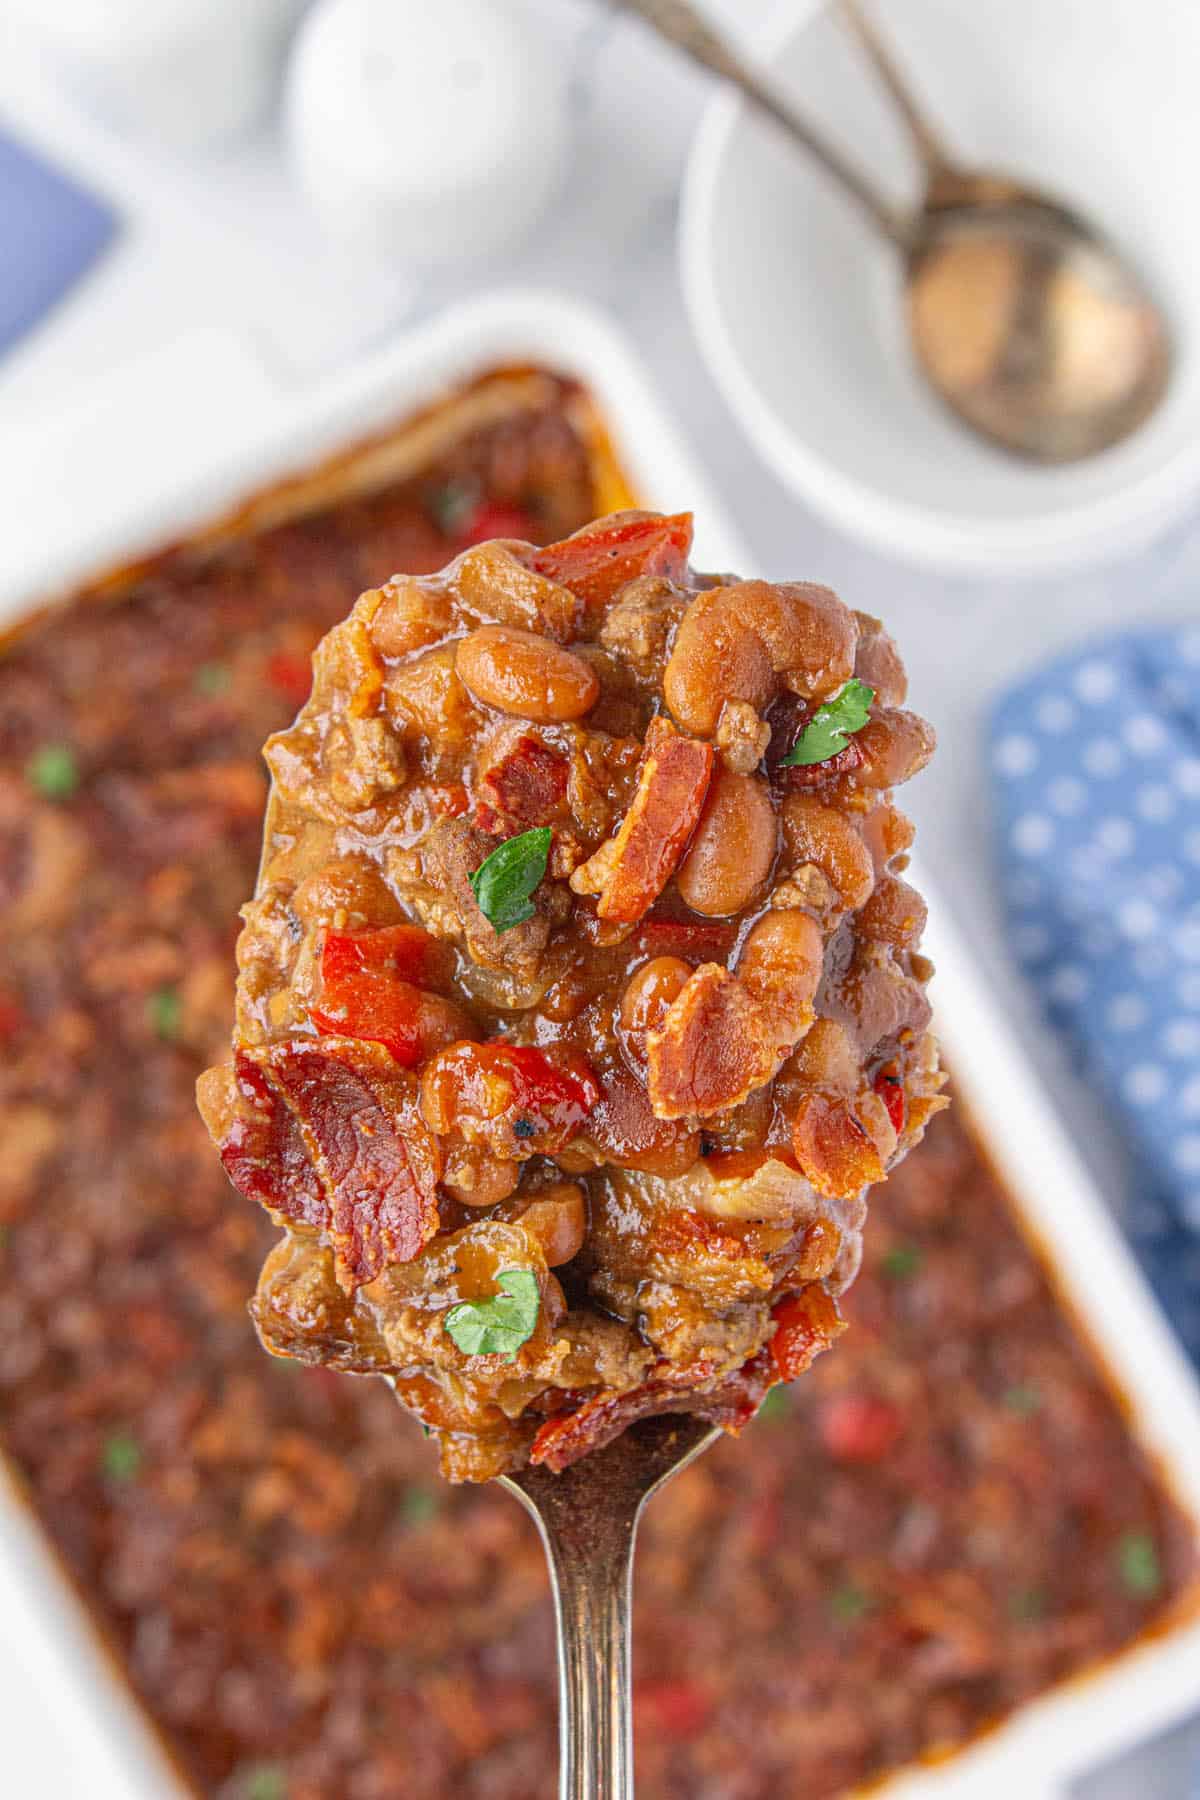 A big casserole dish filled with brown sugar baked beans. There's a close-up of a spoon holding a scoop of the beans.